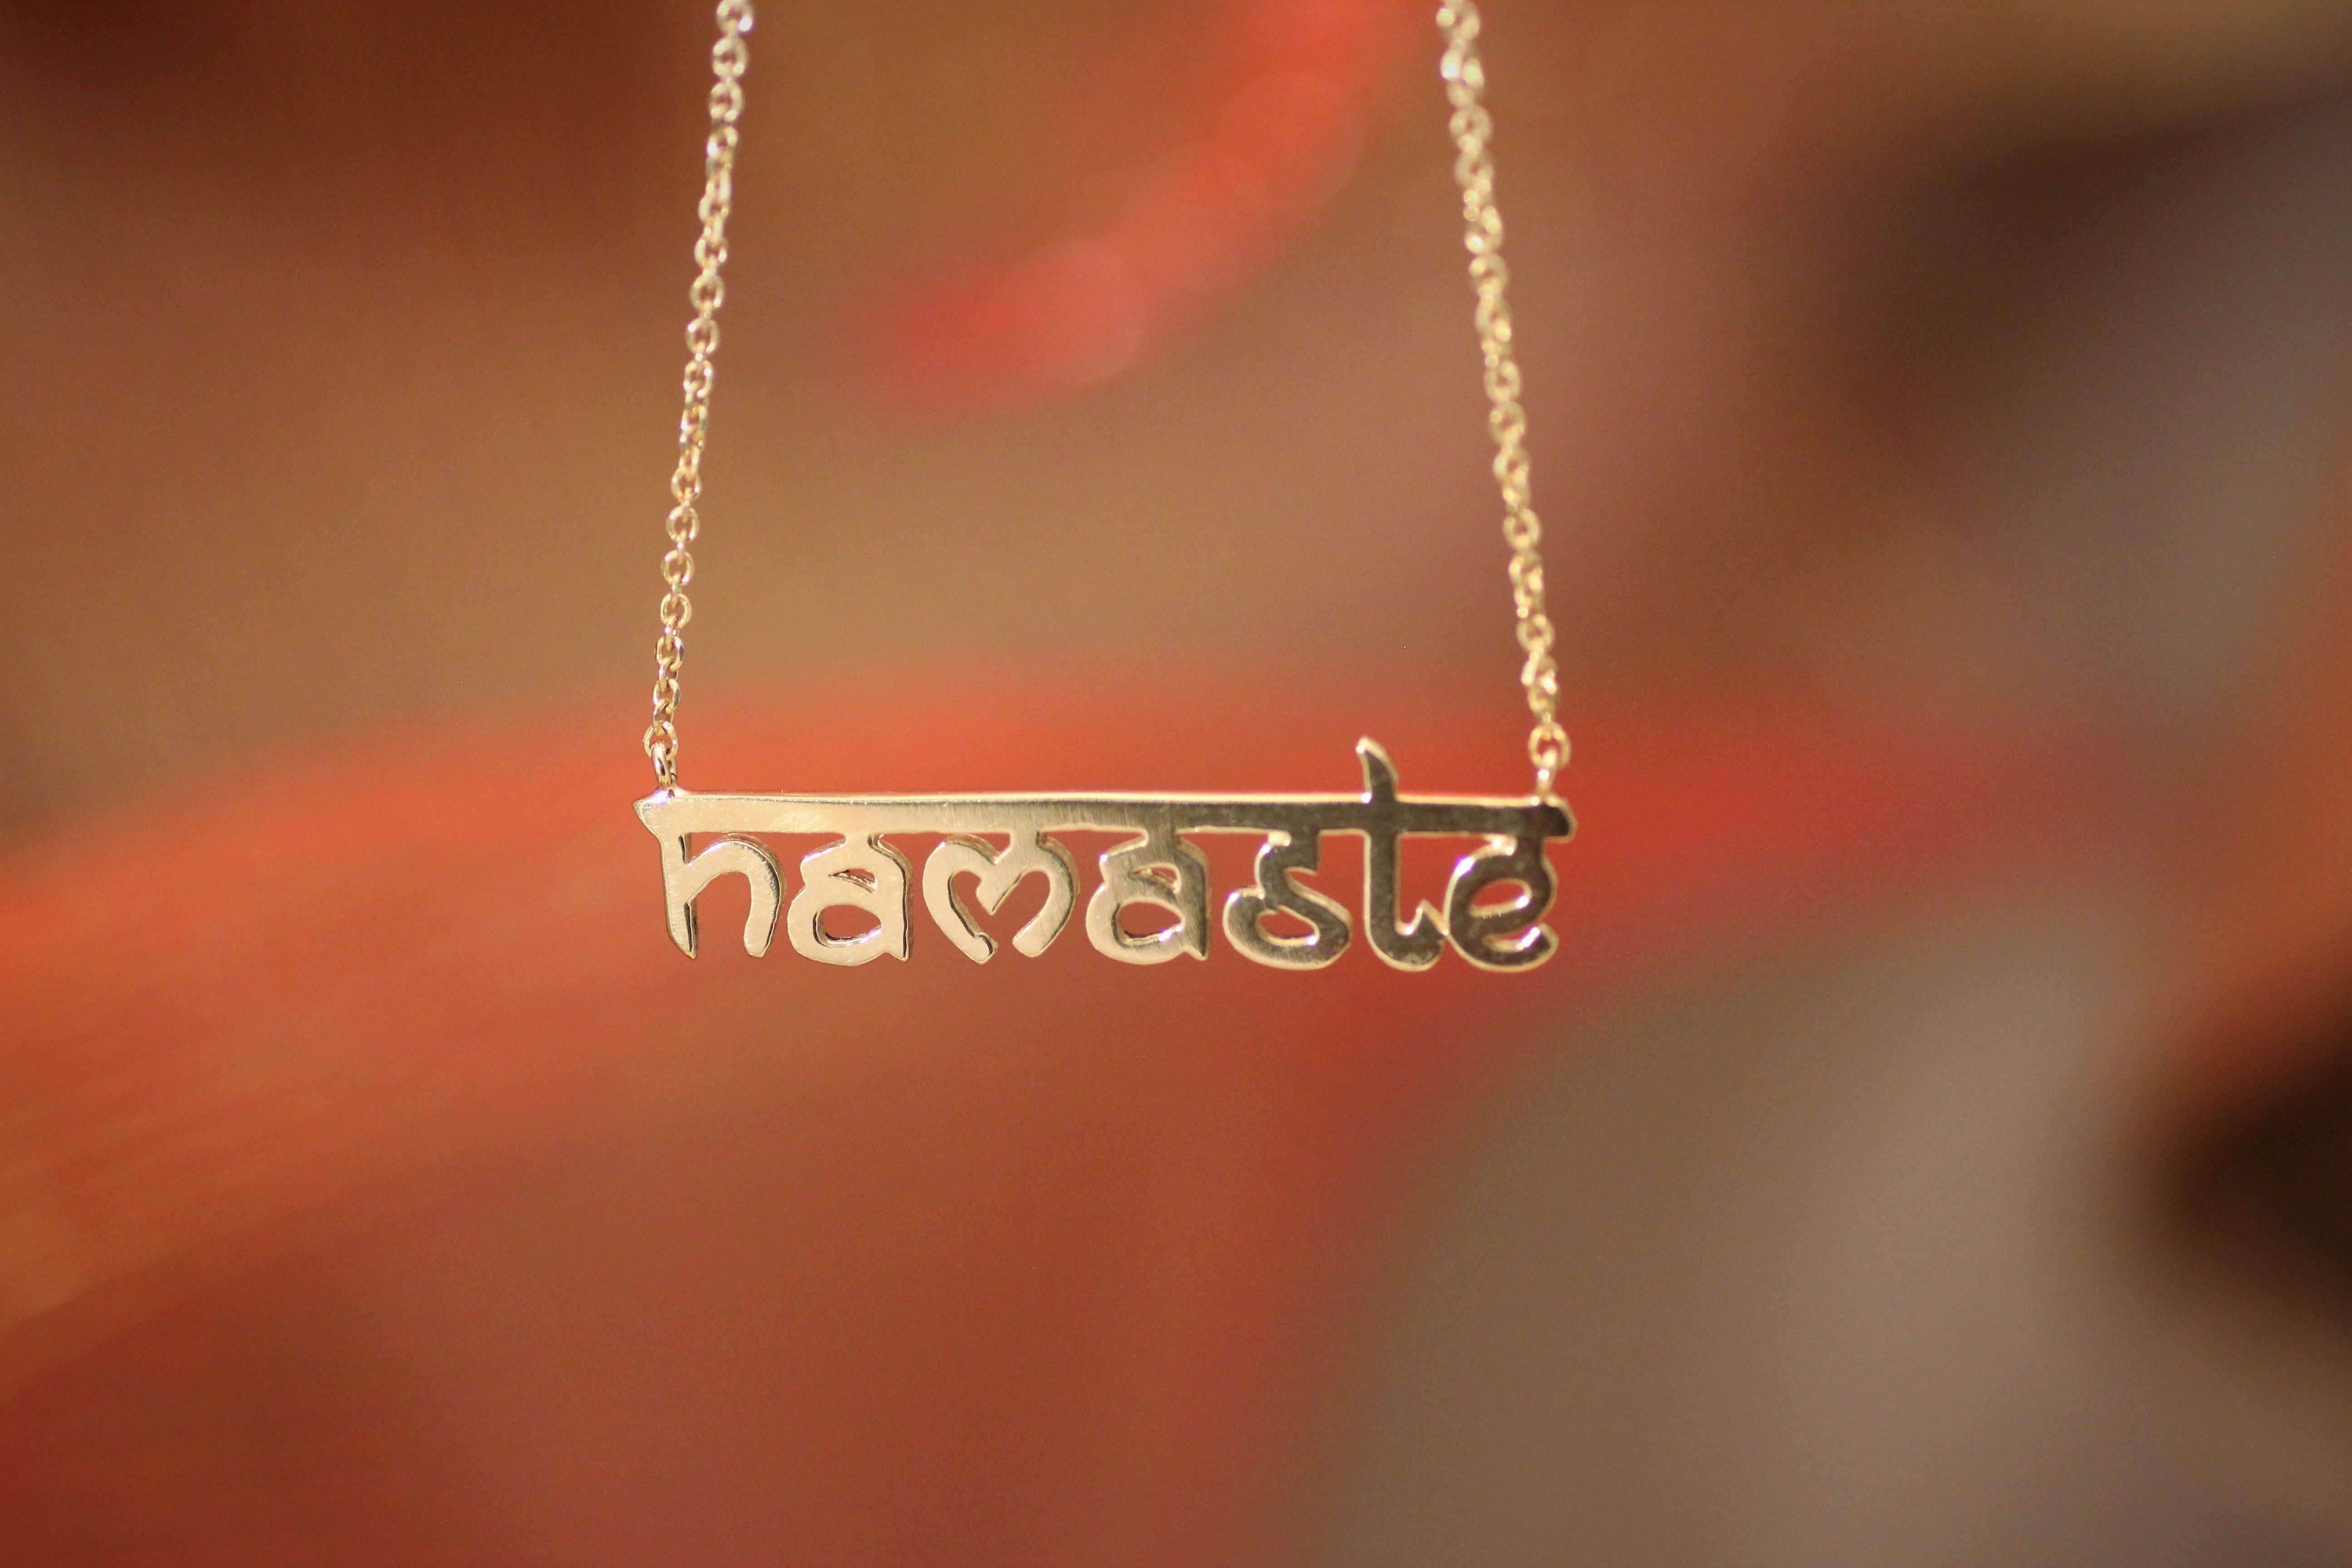 Pendant Necklace inspired by Yoga ''Namaste'', handcrafted in 14Kt Gold.
Namaste is a devout greeting with a wonderful content. By saying this word, you greet that place in your body, where the universe lives. This unique pendant necklace belongs to